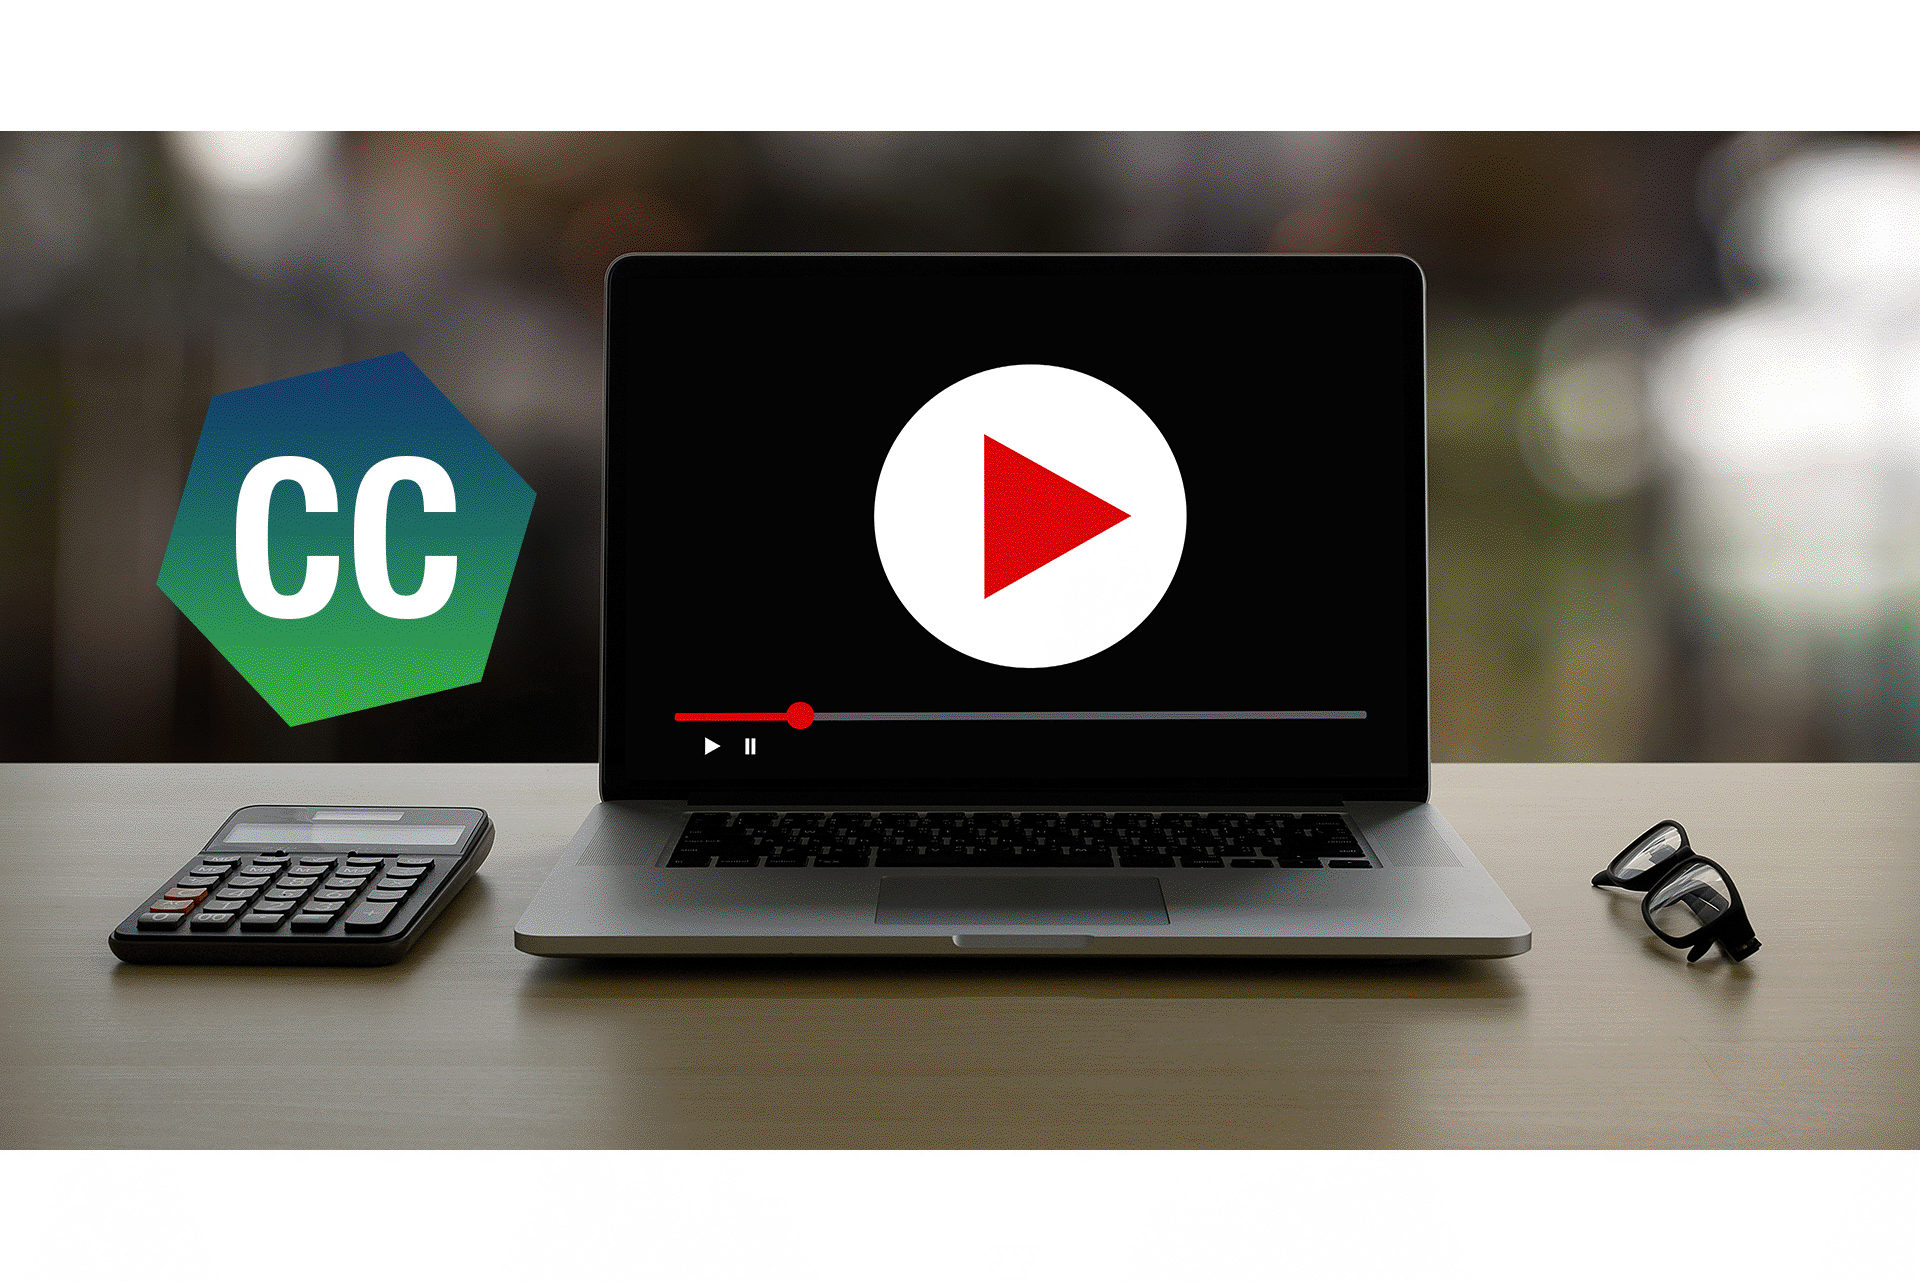 How Closed Captioning Make Videos More Accessible